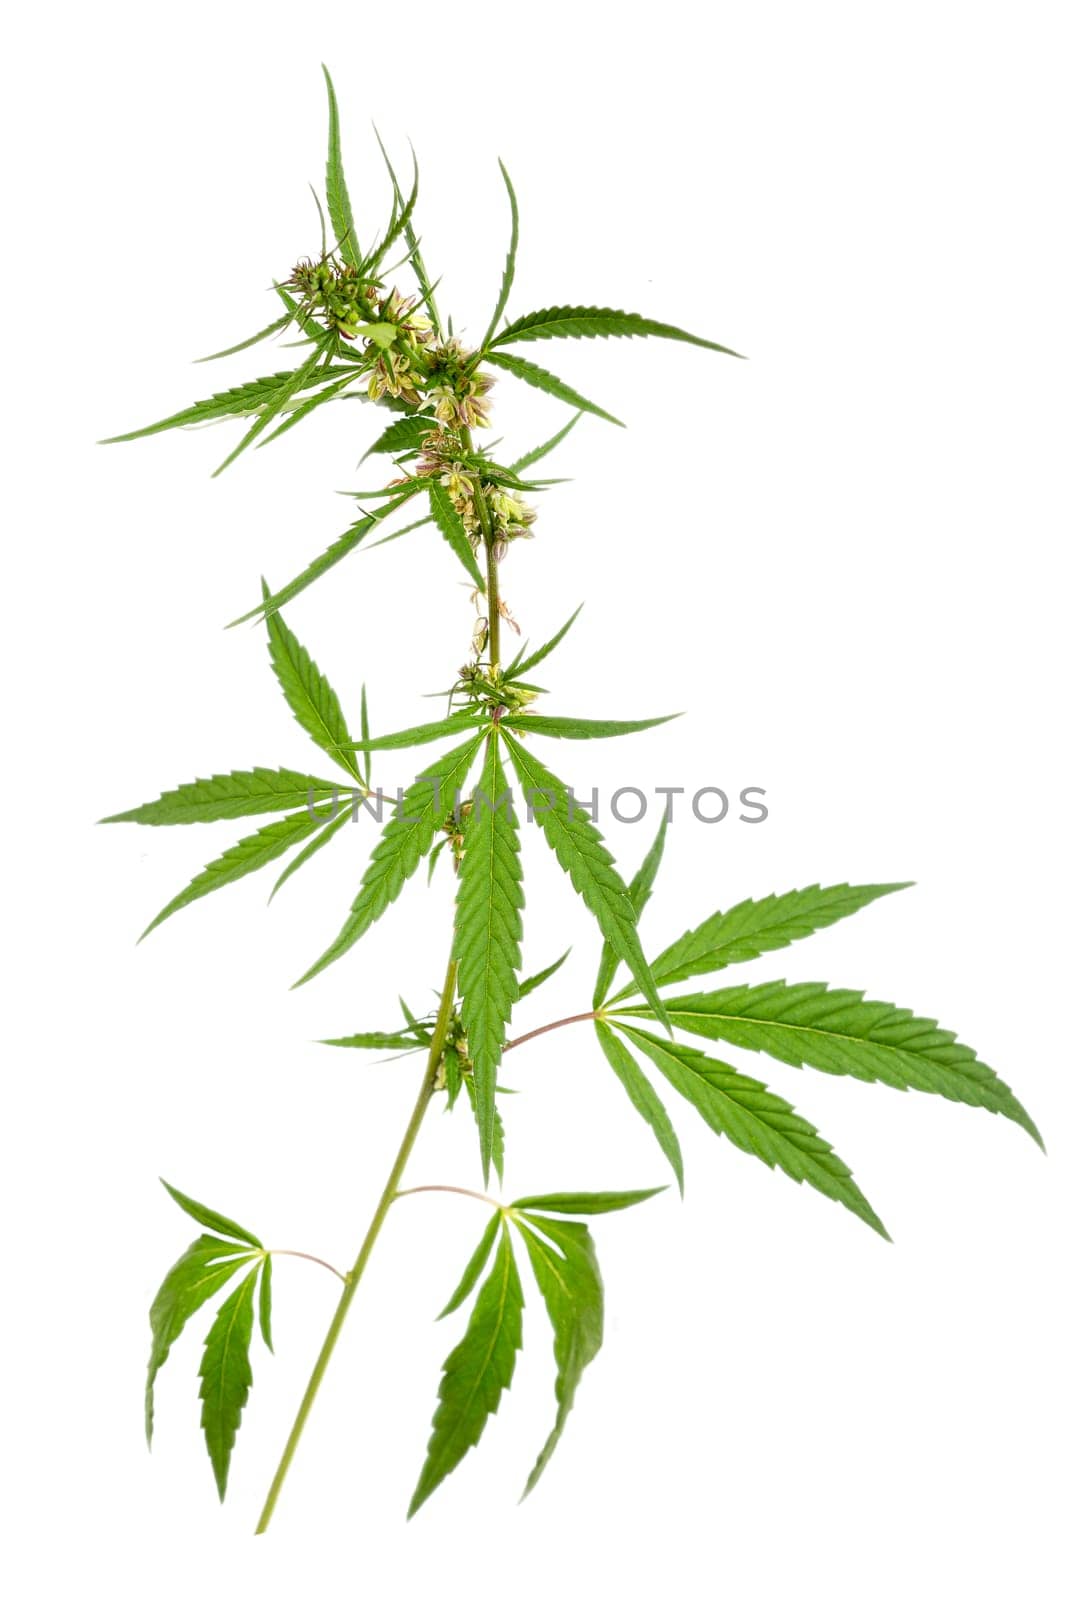 Green cannabis leaves . CBD extract from hemp leaf, Concept of herbal alternative medicine, THC oil pharmaceutical.